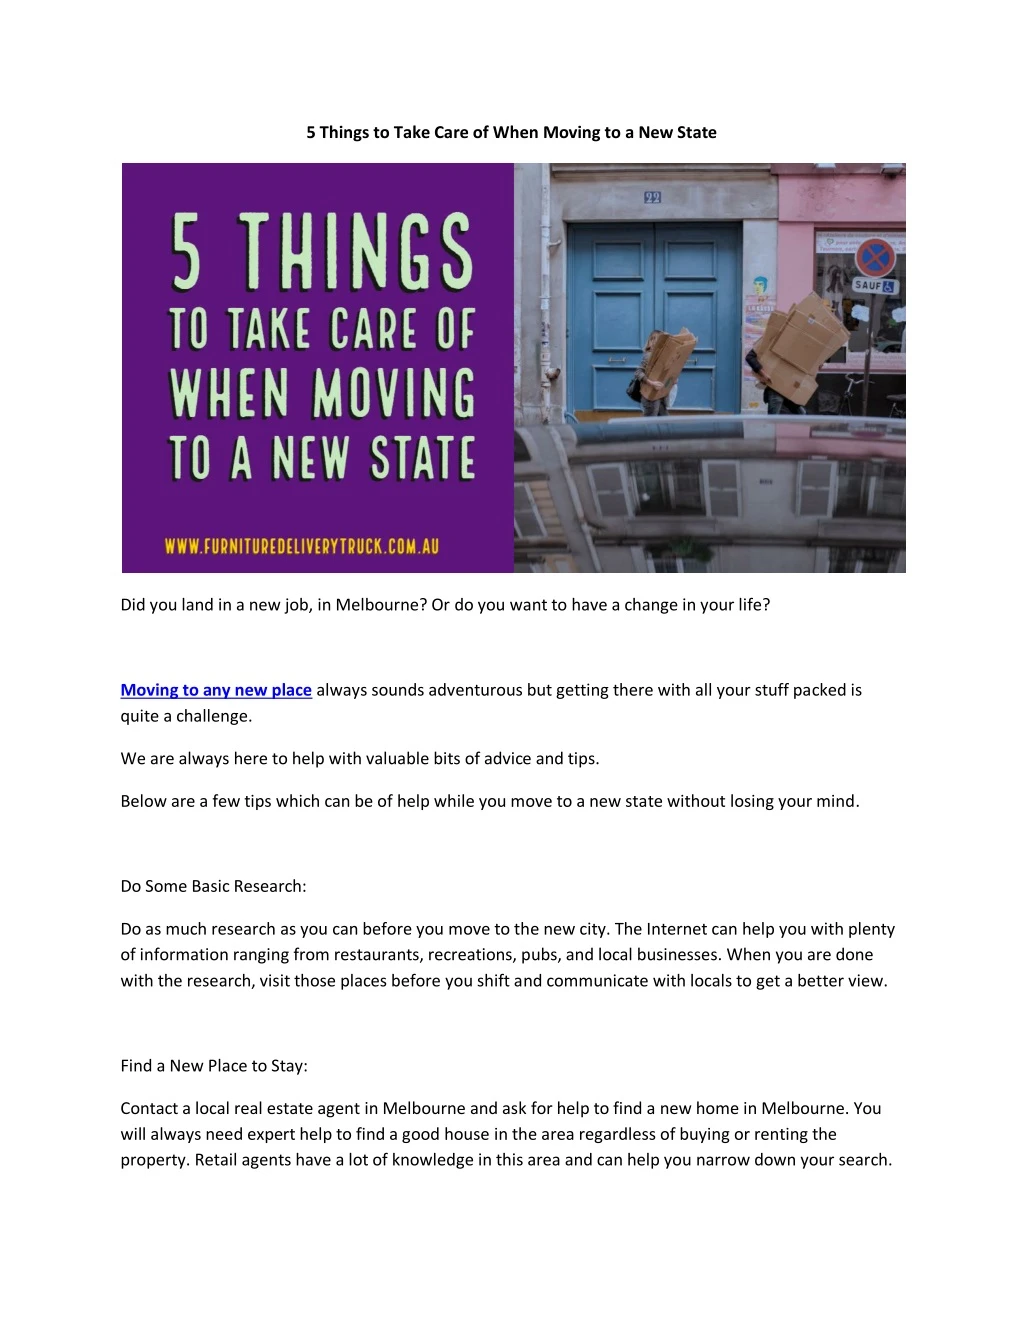 5 things to take care of when moving